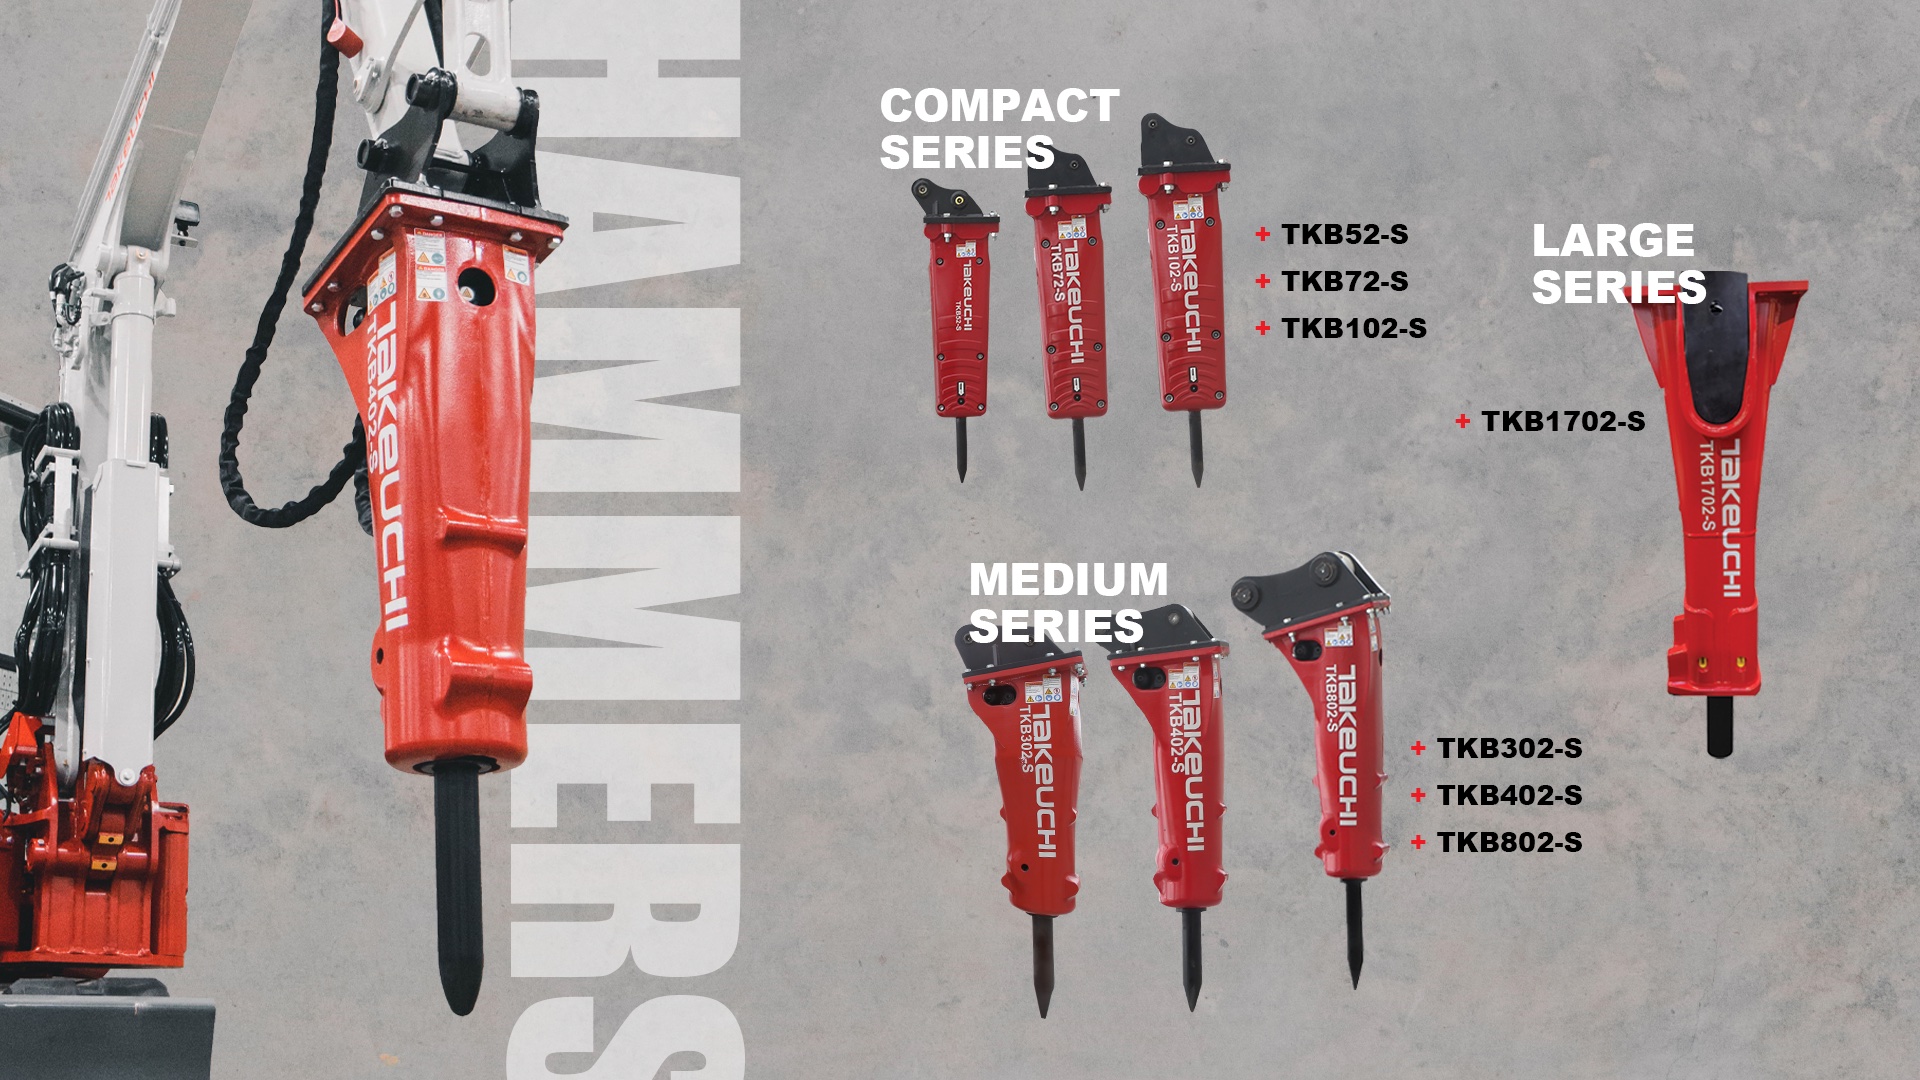 Takeuchi launches new line of hydraulic hammers